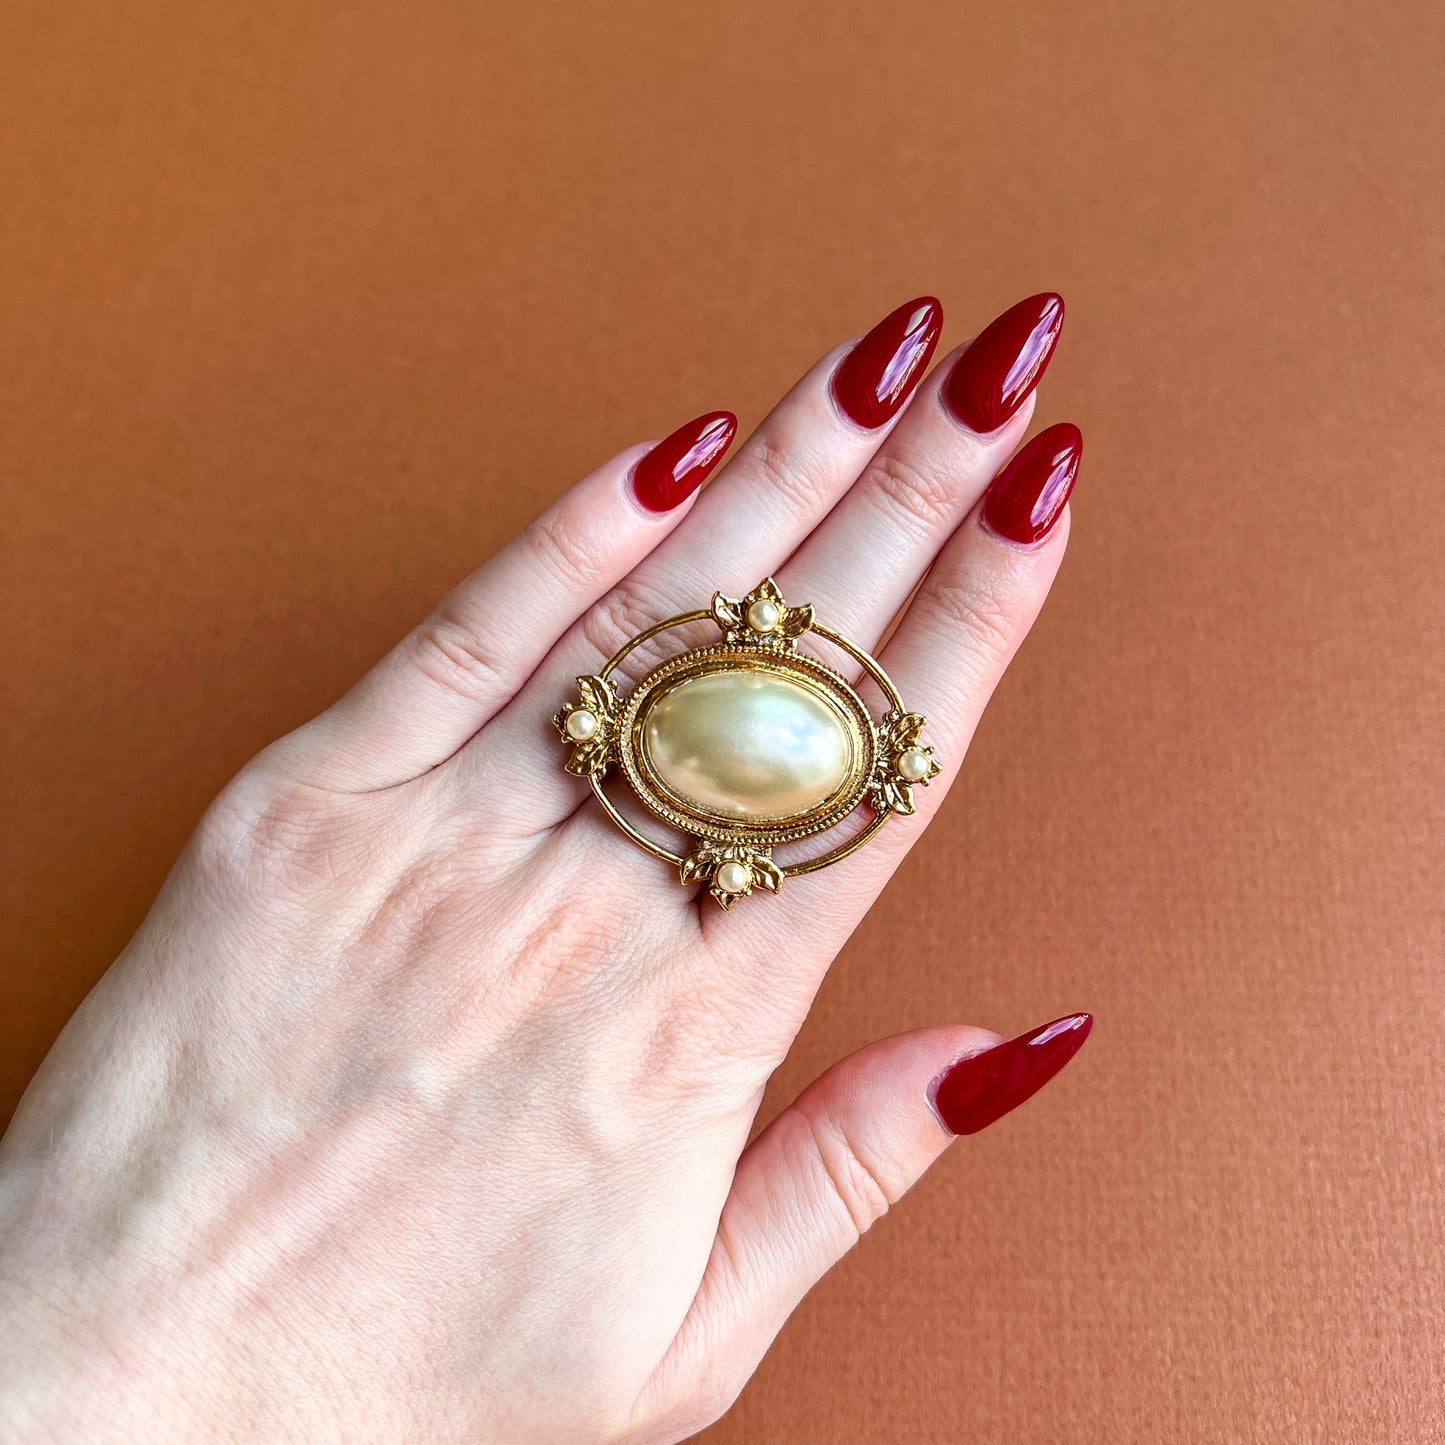 1950s Large Faux Pearl Brooch